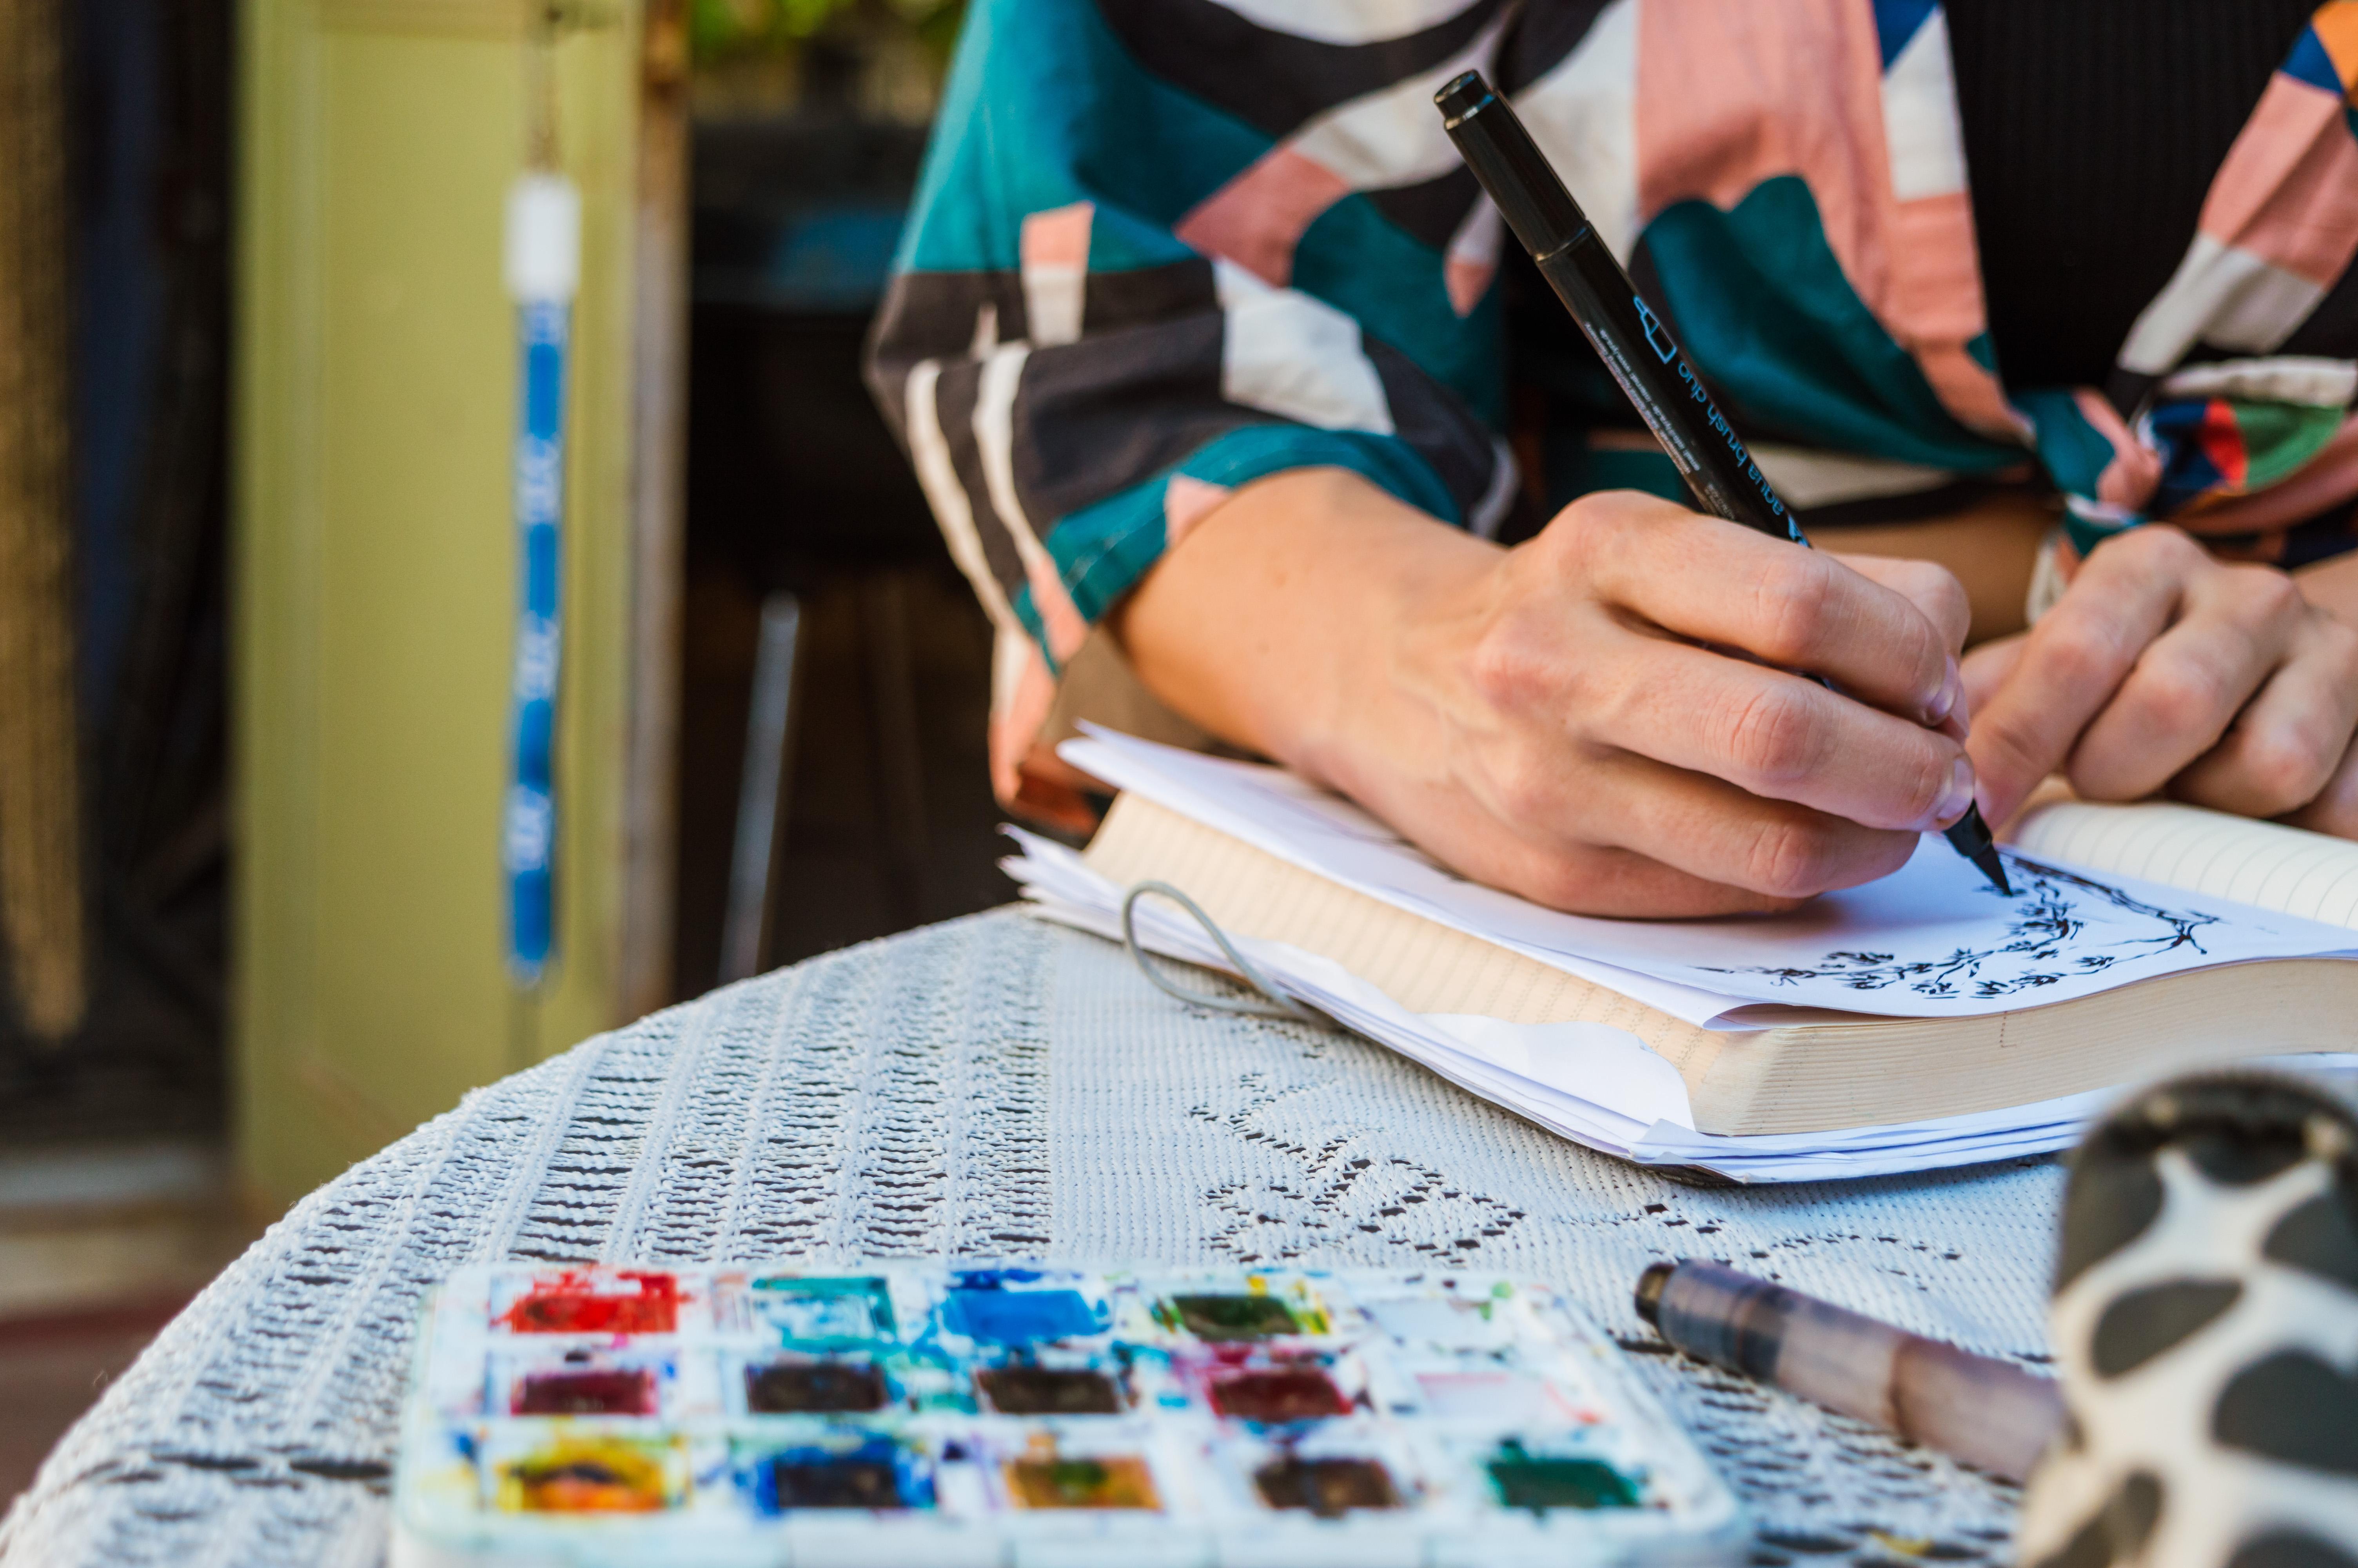 A woman sketching in her journal with paint supplies at hand